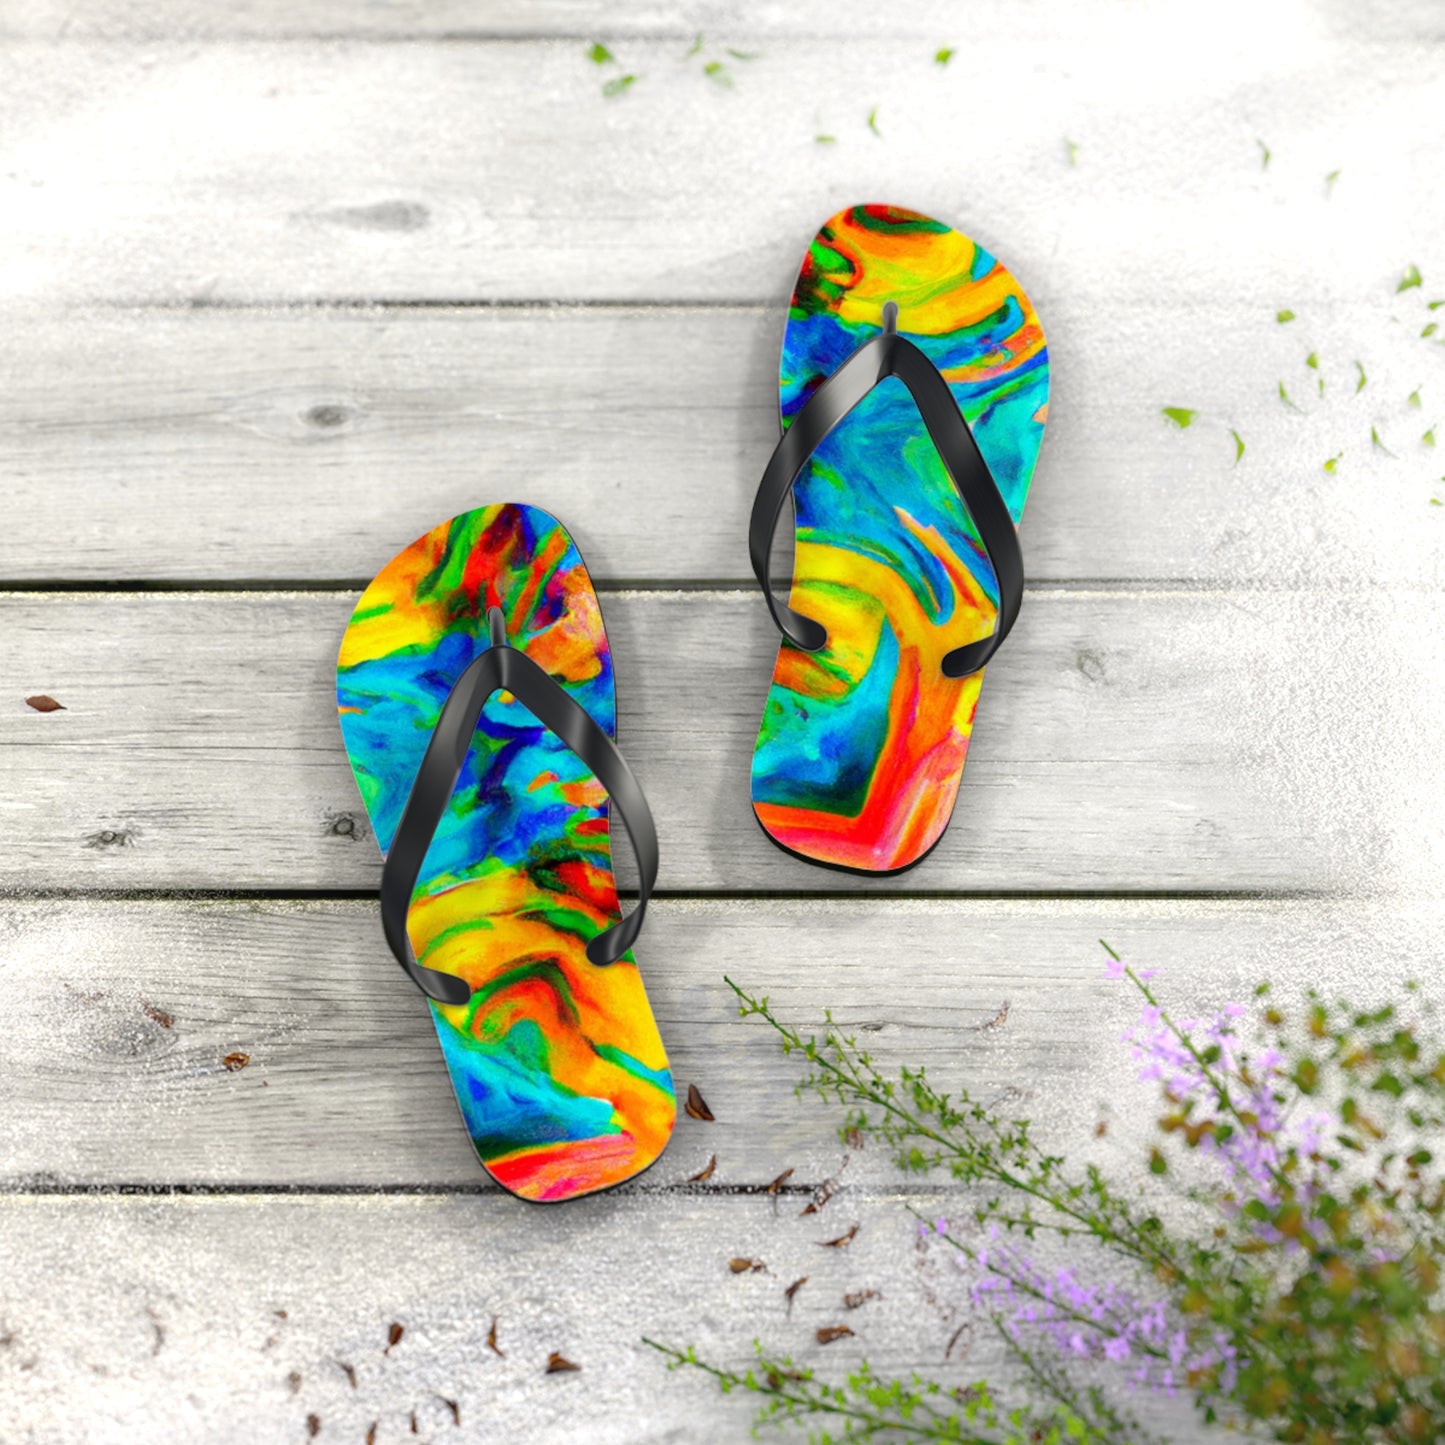 's name

Fenella Fitcheringshoes - Psychedelic Trippy Flip Flop Beach Sandals